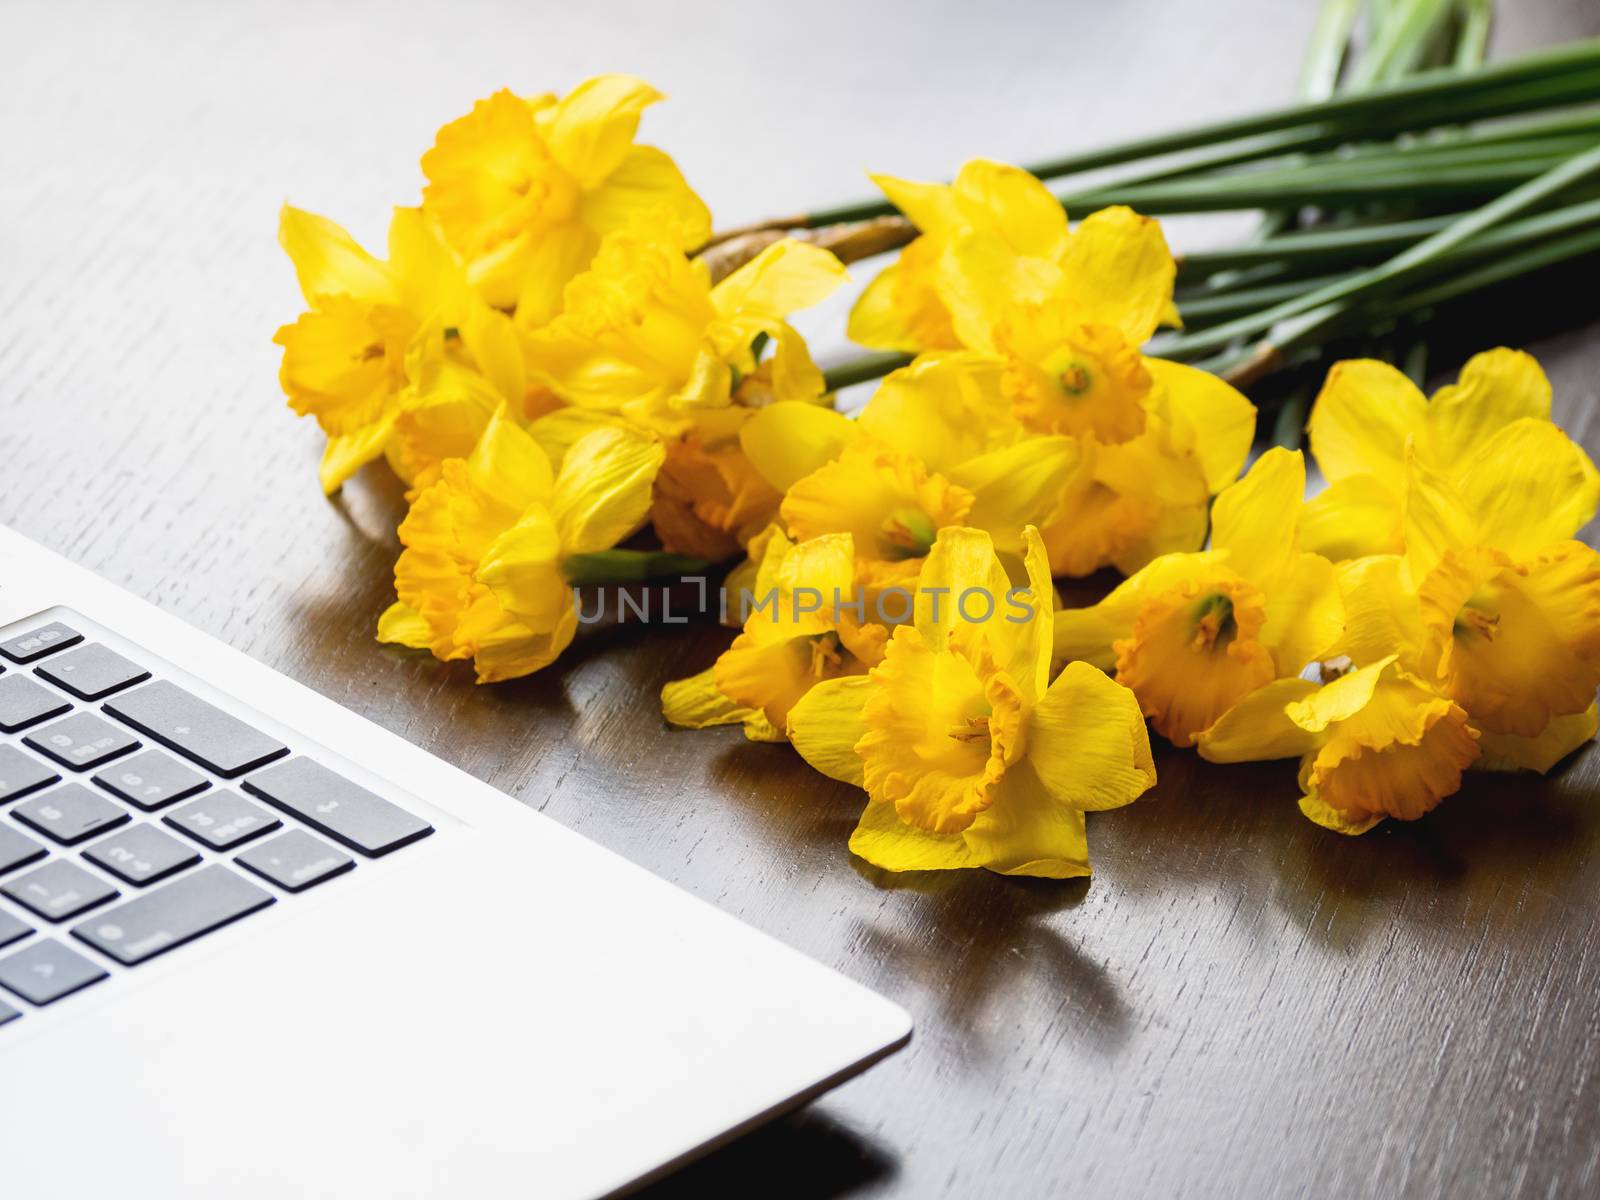 Bouquet of Narcissus or daffodils lying on silver metal laptop. Bright yellow flowers on portable device. Wooden background. by aksenovko